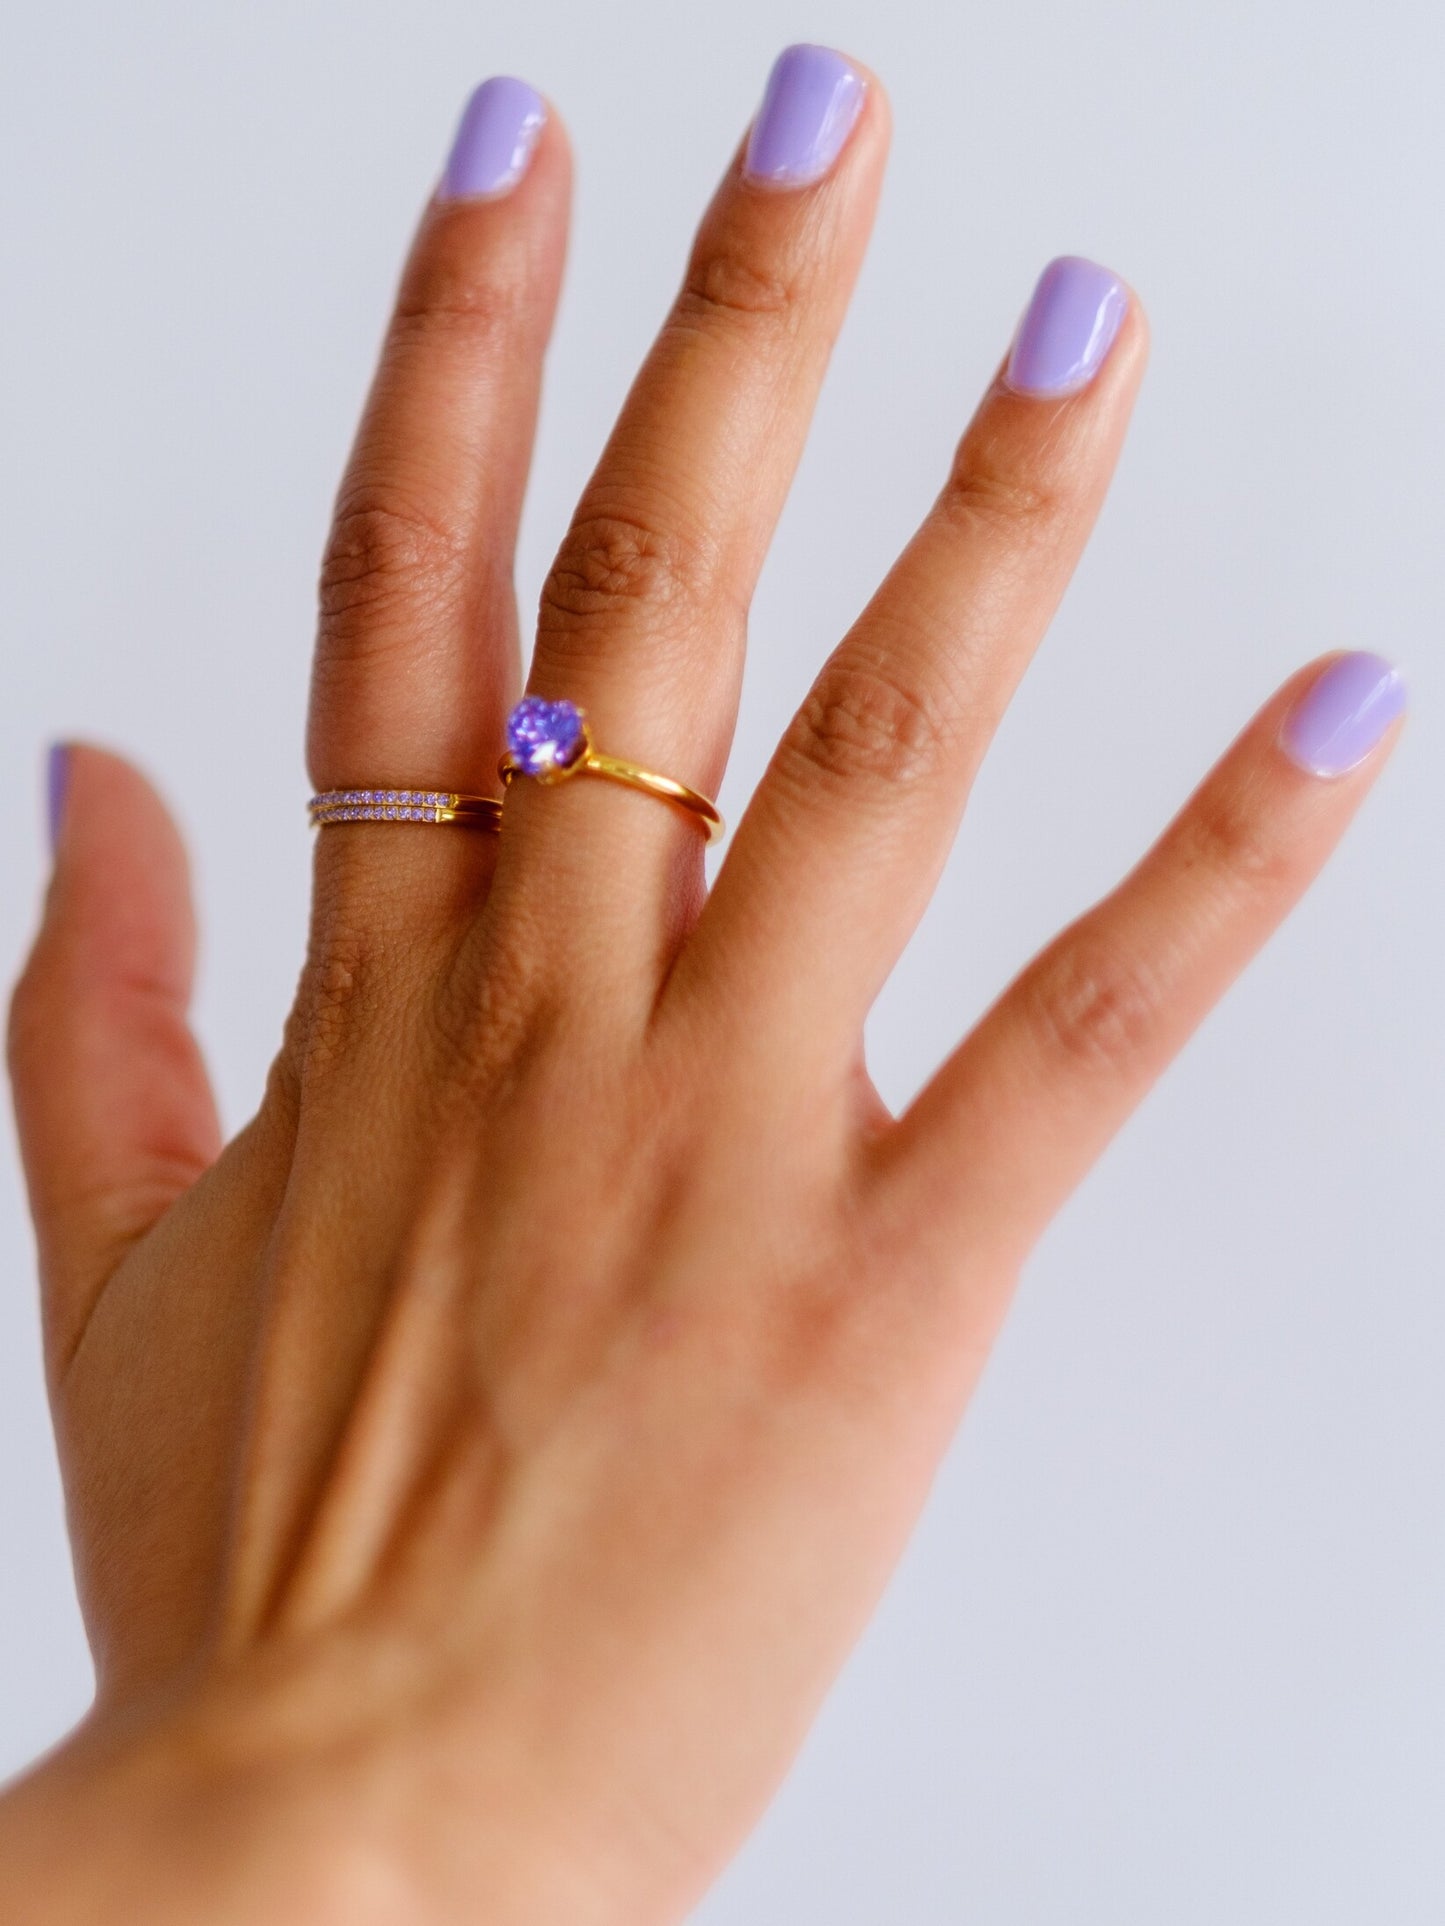 Woman's hand wearing three gold rings in two different styles, set with purple stones